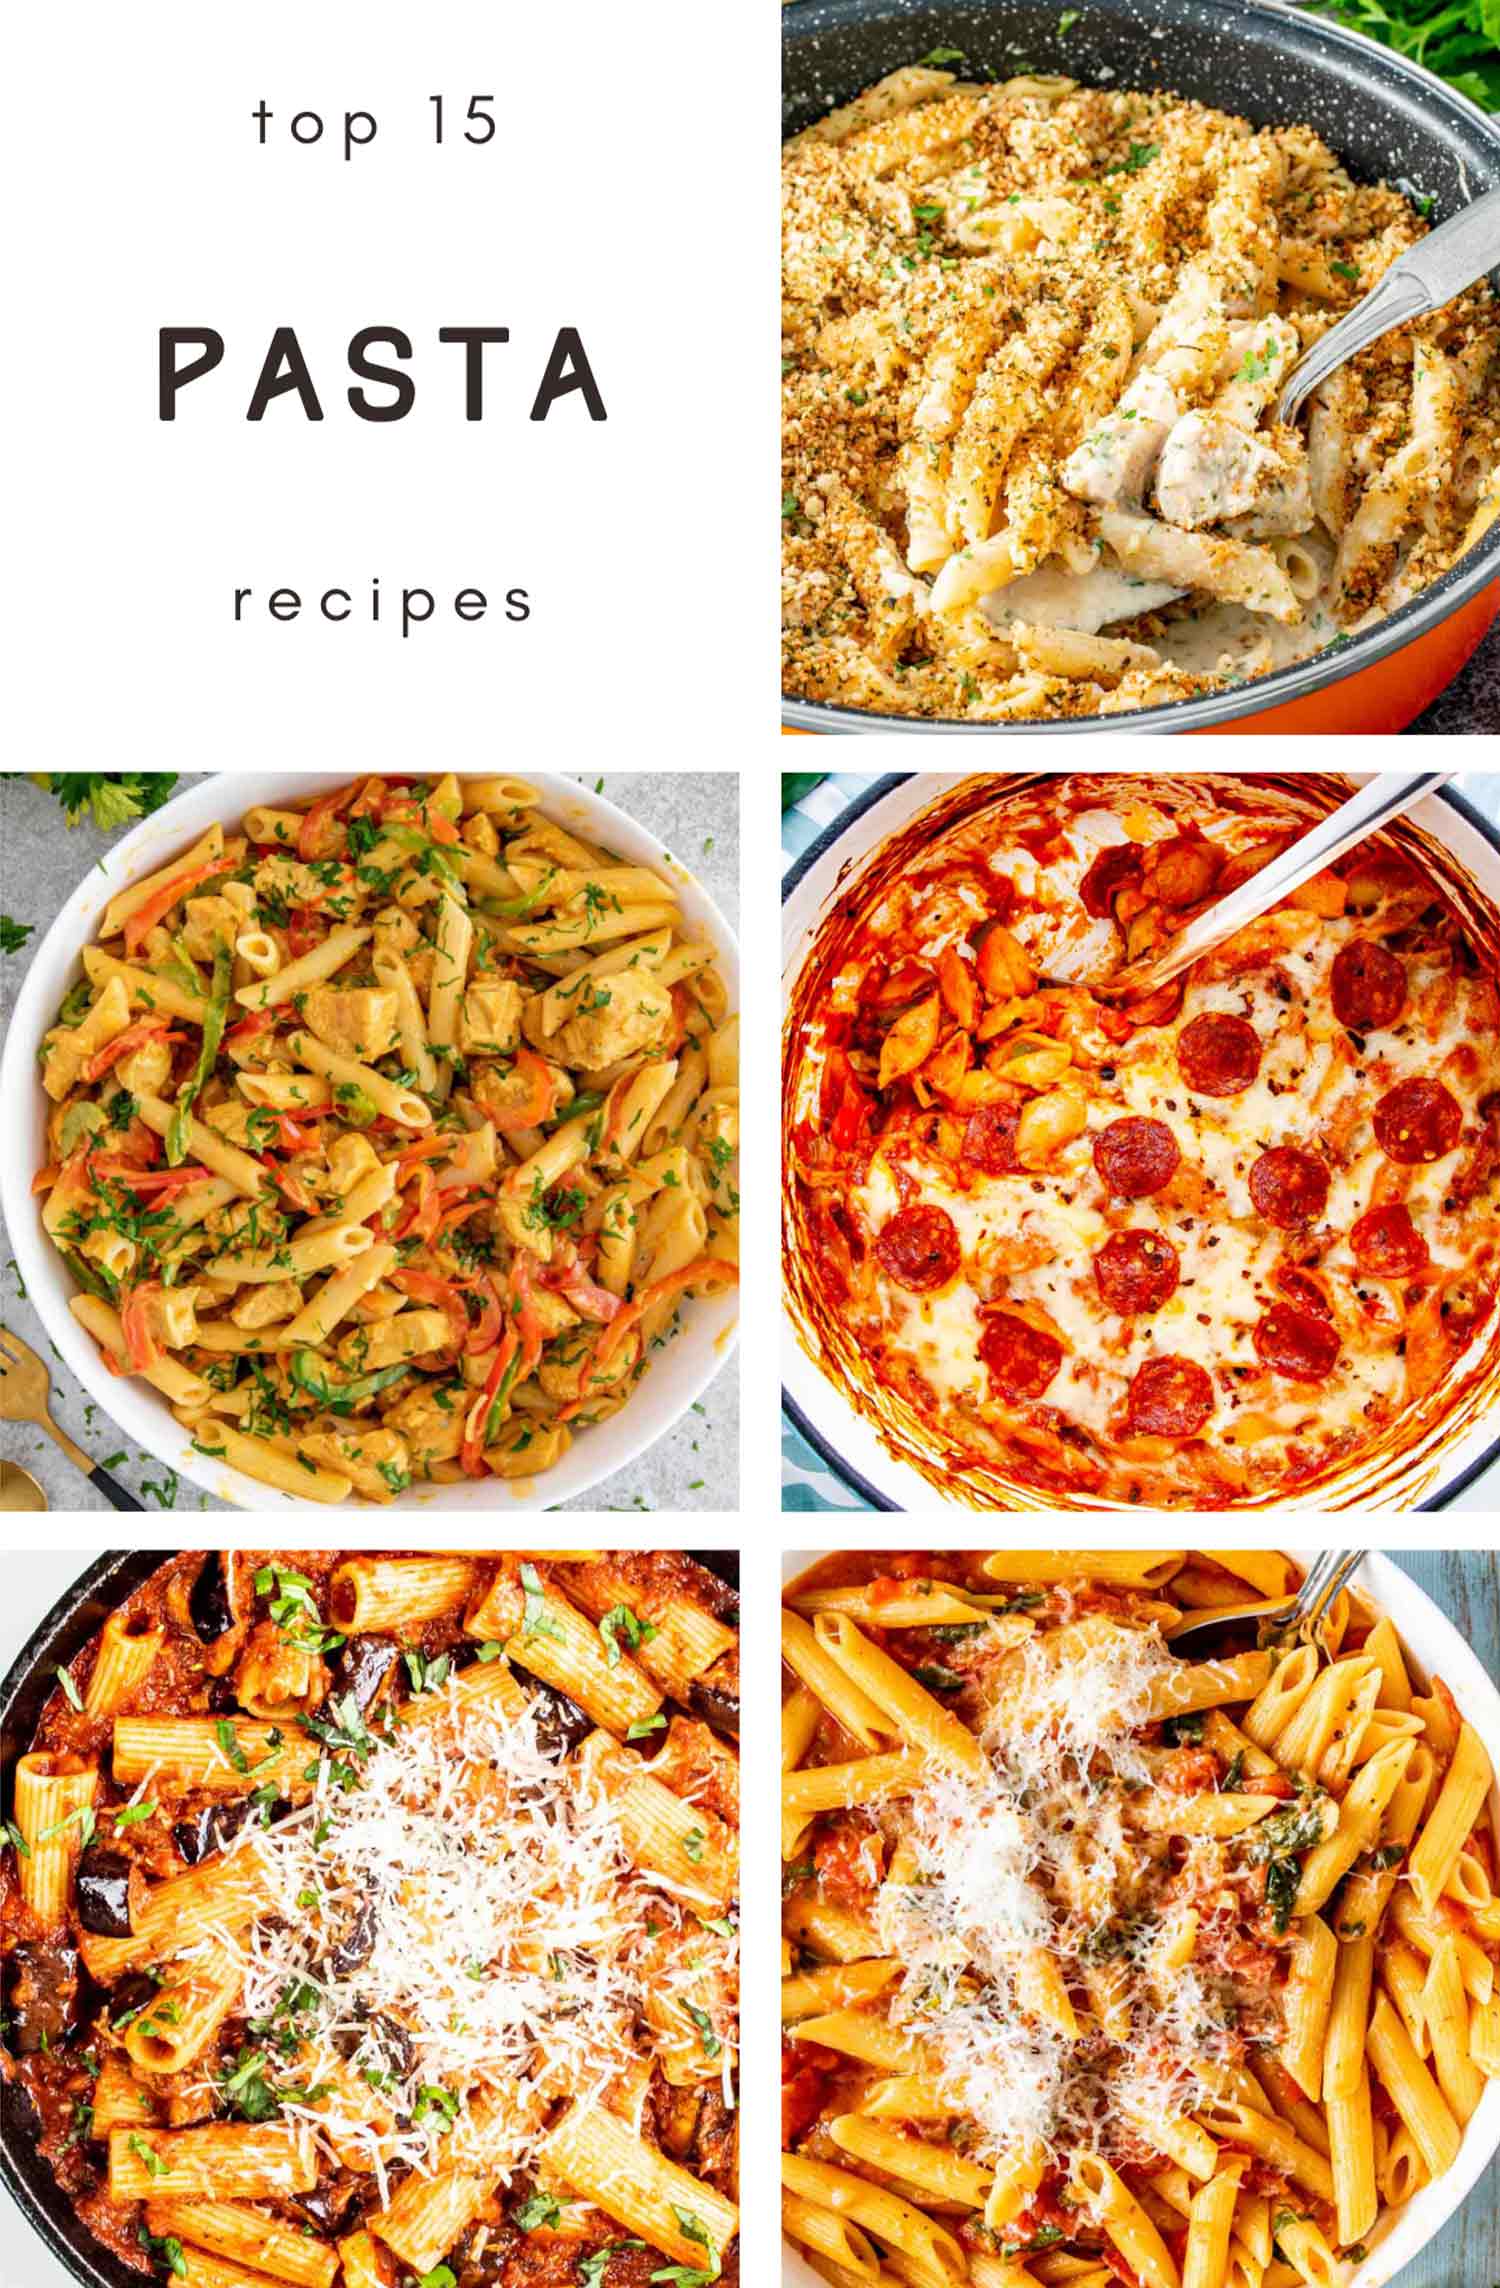 top 15 pasta dishes on craving home cooked.